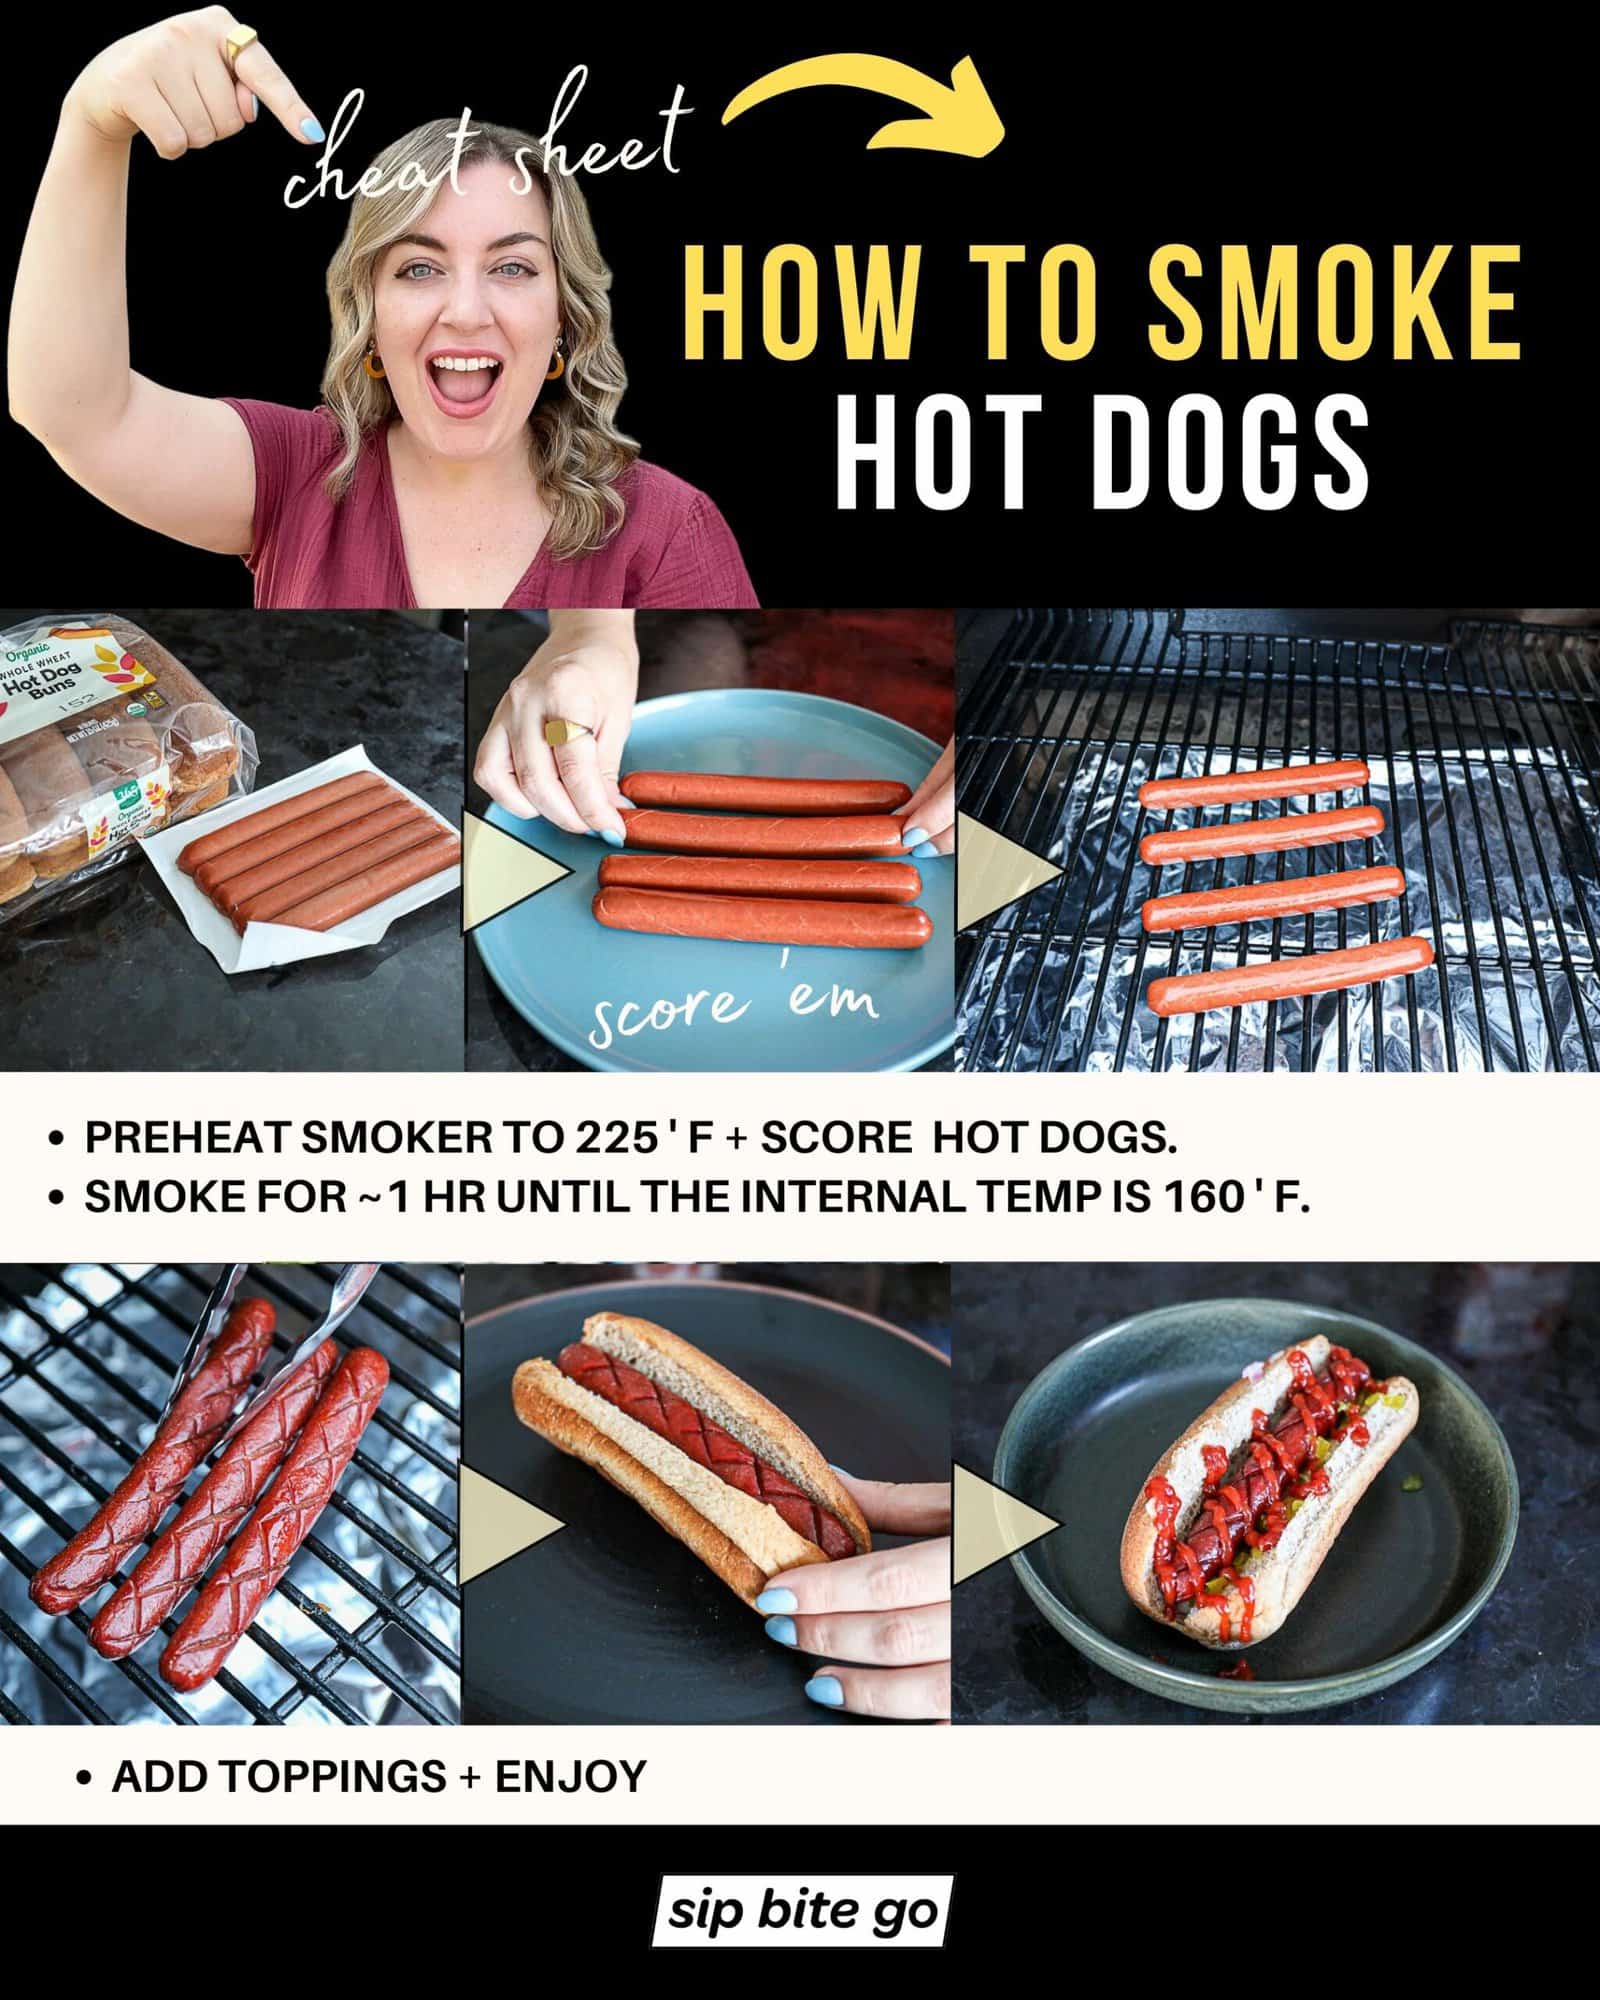 Infographic with recipe steps for smoking hot dogs on the Traeger pellet grill with Jenna Passaro food bogger of Sip Bite Go.jpg